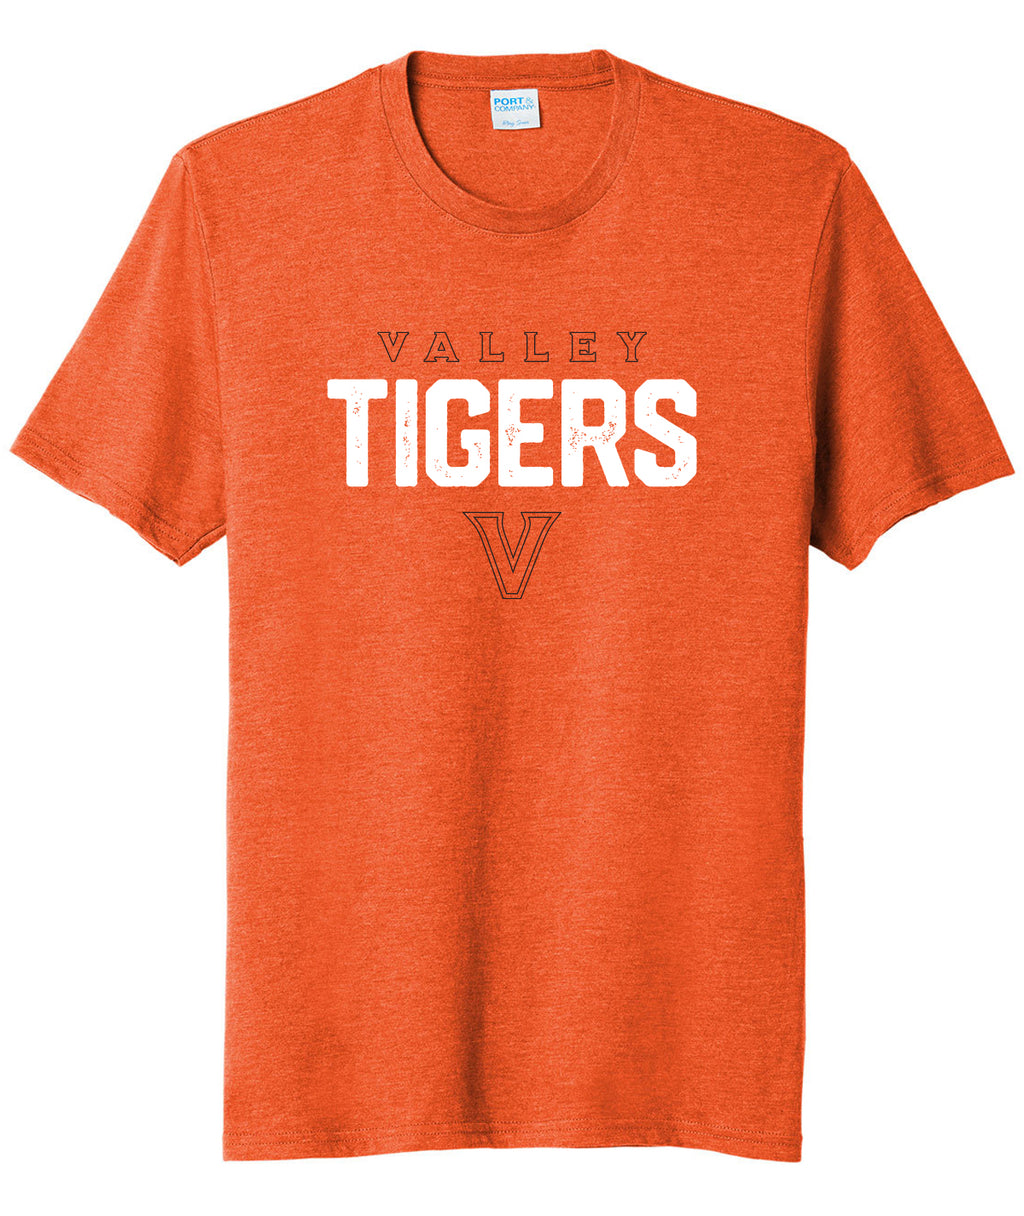 Valley Tigers Lineup Tri-Blend Tee